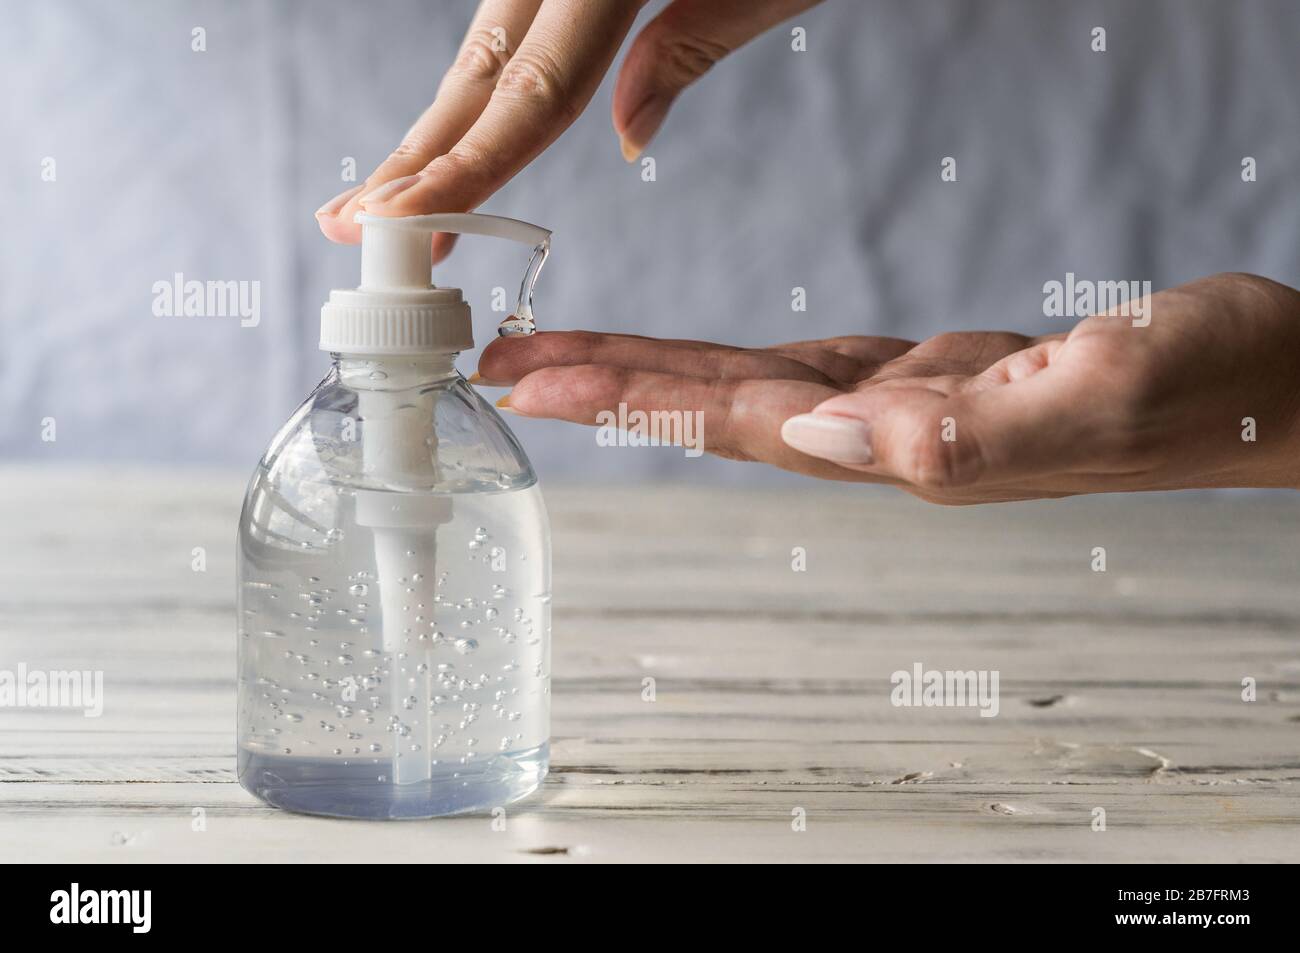 Hand sanitizer gel with alcohol disinfectant for prevention of coronavirus. Stock Photo